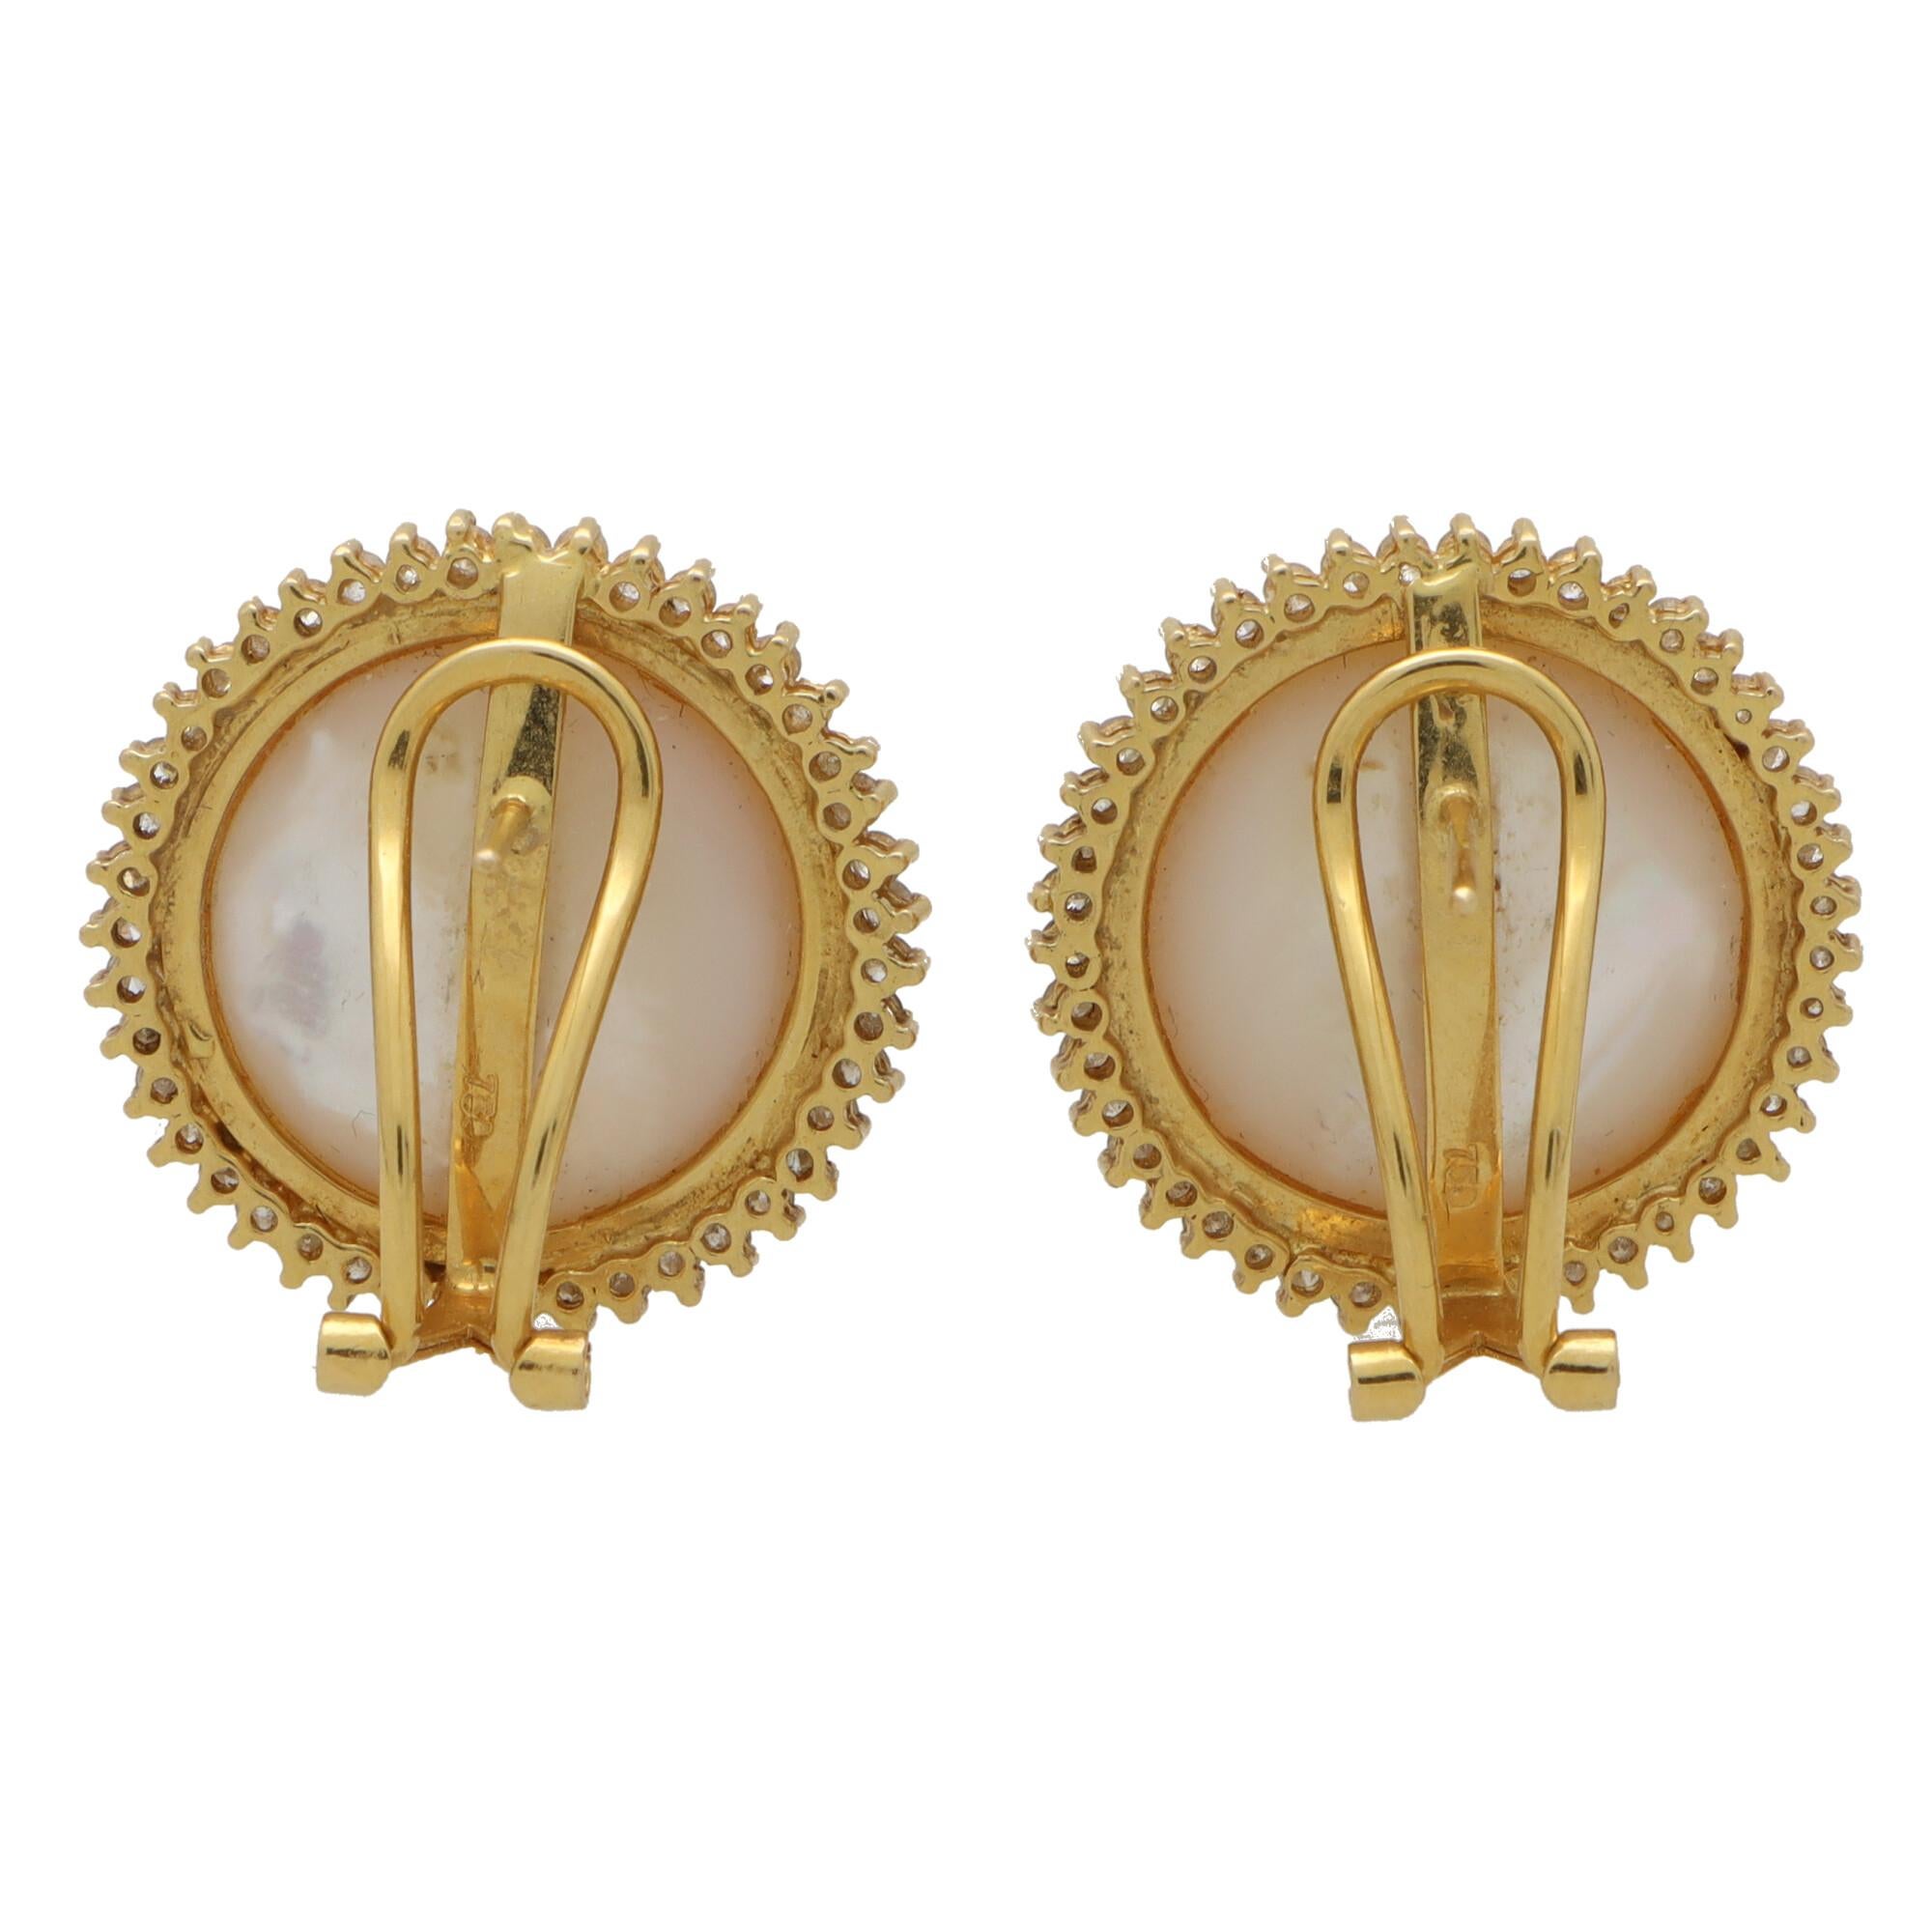 A beautiful pair of vintage Mabe pearl and diamond earrings set in 18k yellow gold. 

Each earring is centrally set with a lustrous 17-millimetre Mabe pearl surrounded by an elegant halo of 43 round brilliant cut diamonds. The earrings are secured